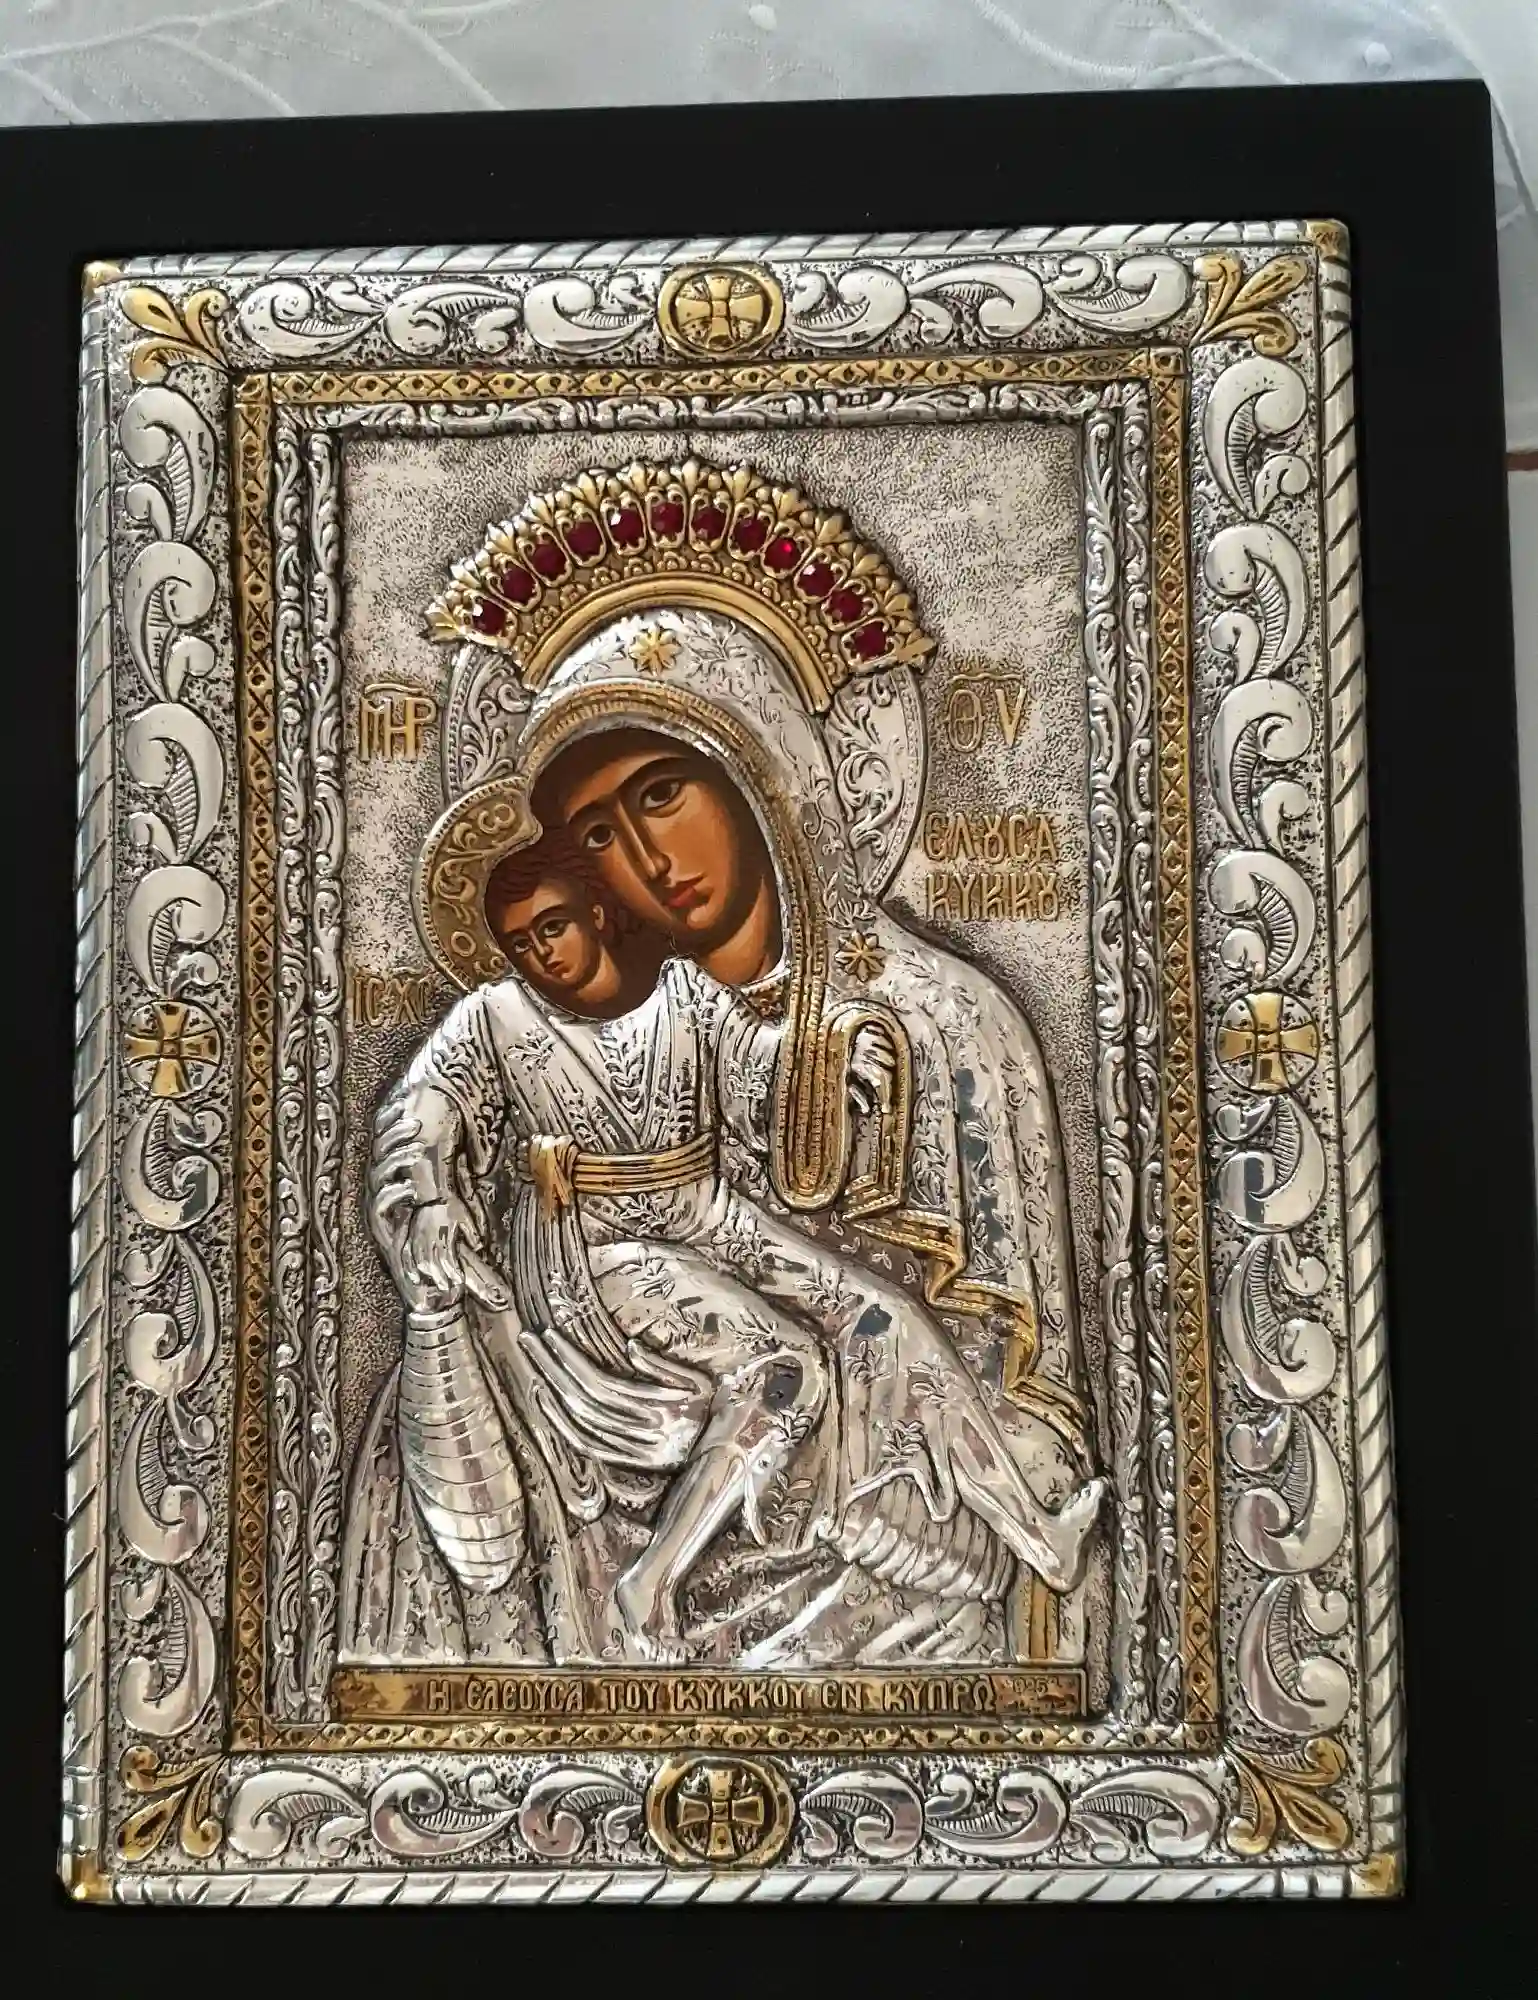 Solid Silver BYZANTINE Icon 24kt GOLD EASTERN Orthodox Russian Christian Handmade Virgin Mary Our Lady Panagia Kykko Theotoko Tarnish free 